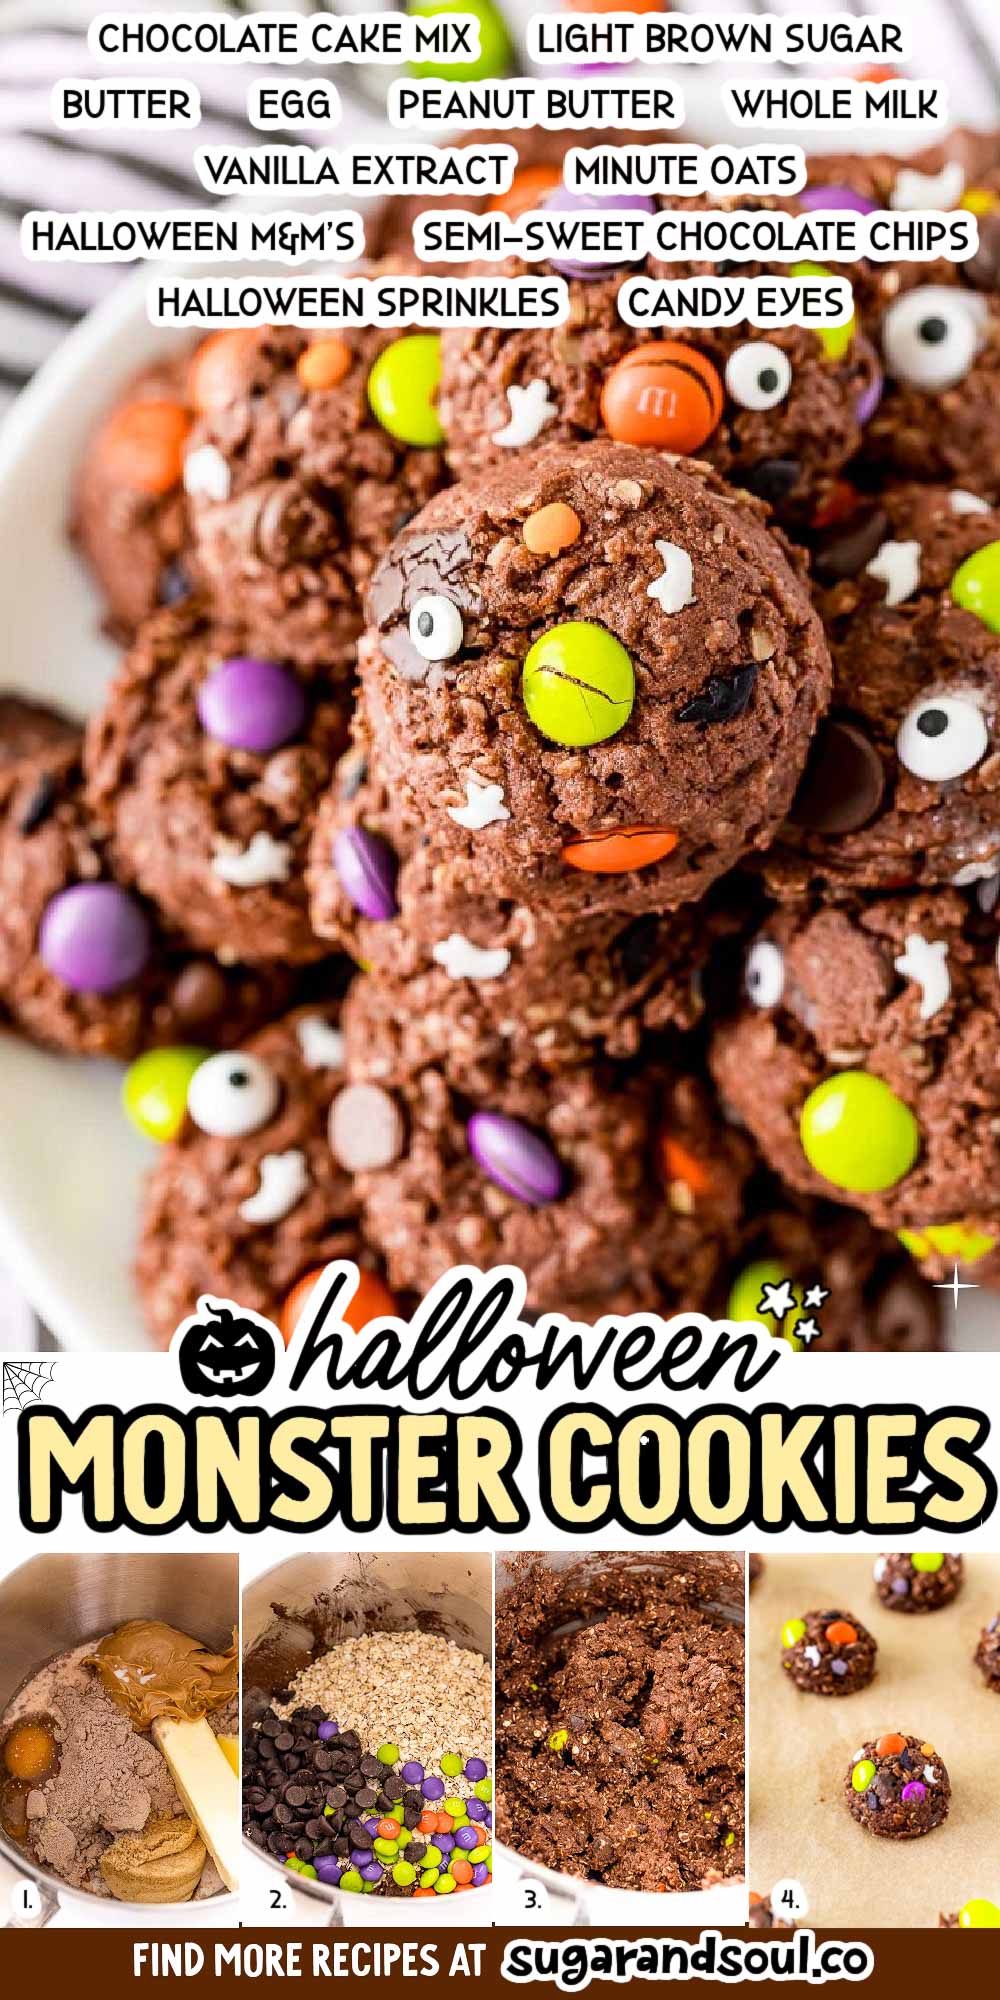 Halloween Monster Cookies are scary delicious! These treats are made with chocolate cake mix, quick oats, and peanut butter, then loaded with M&Ms and chocolate chips.  via @sugarandsoulco